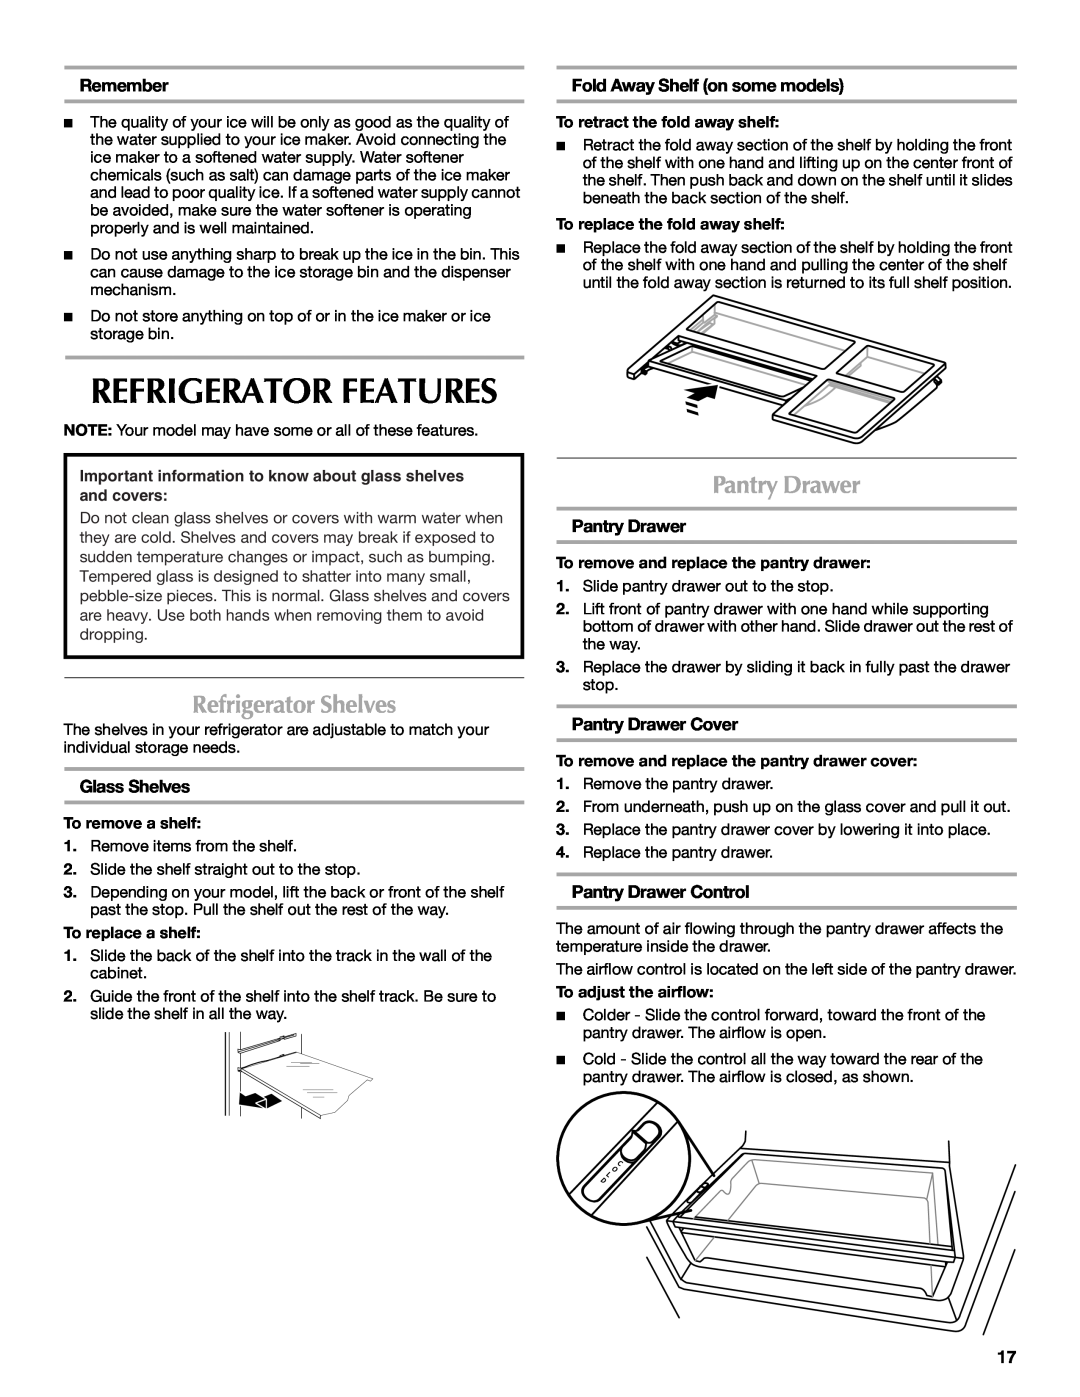 Maytag W10400978A Refrigerator Features, Refrigerator Shelves, Remember, Glass Shelves, Pantry Drawer Cover 